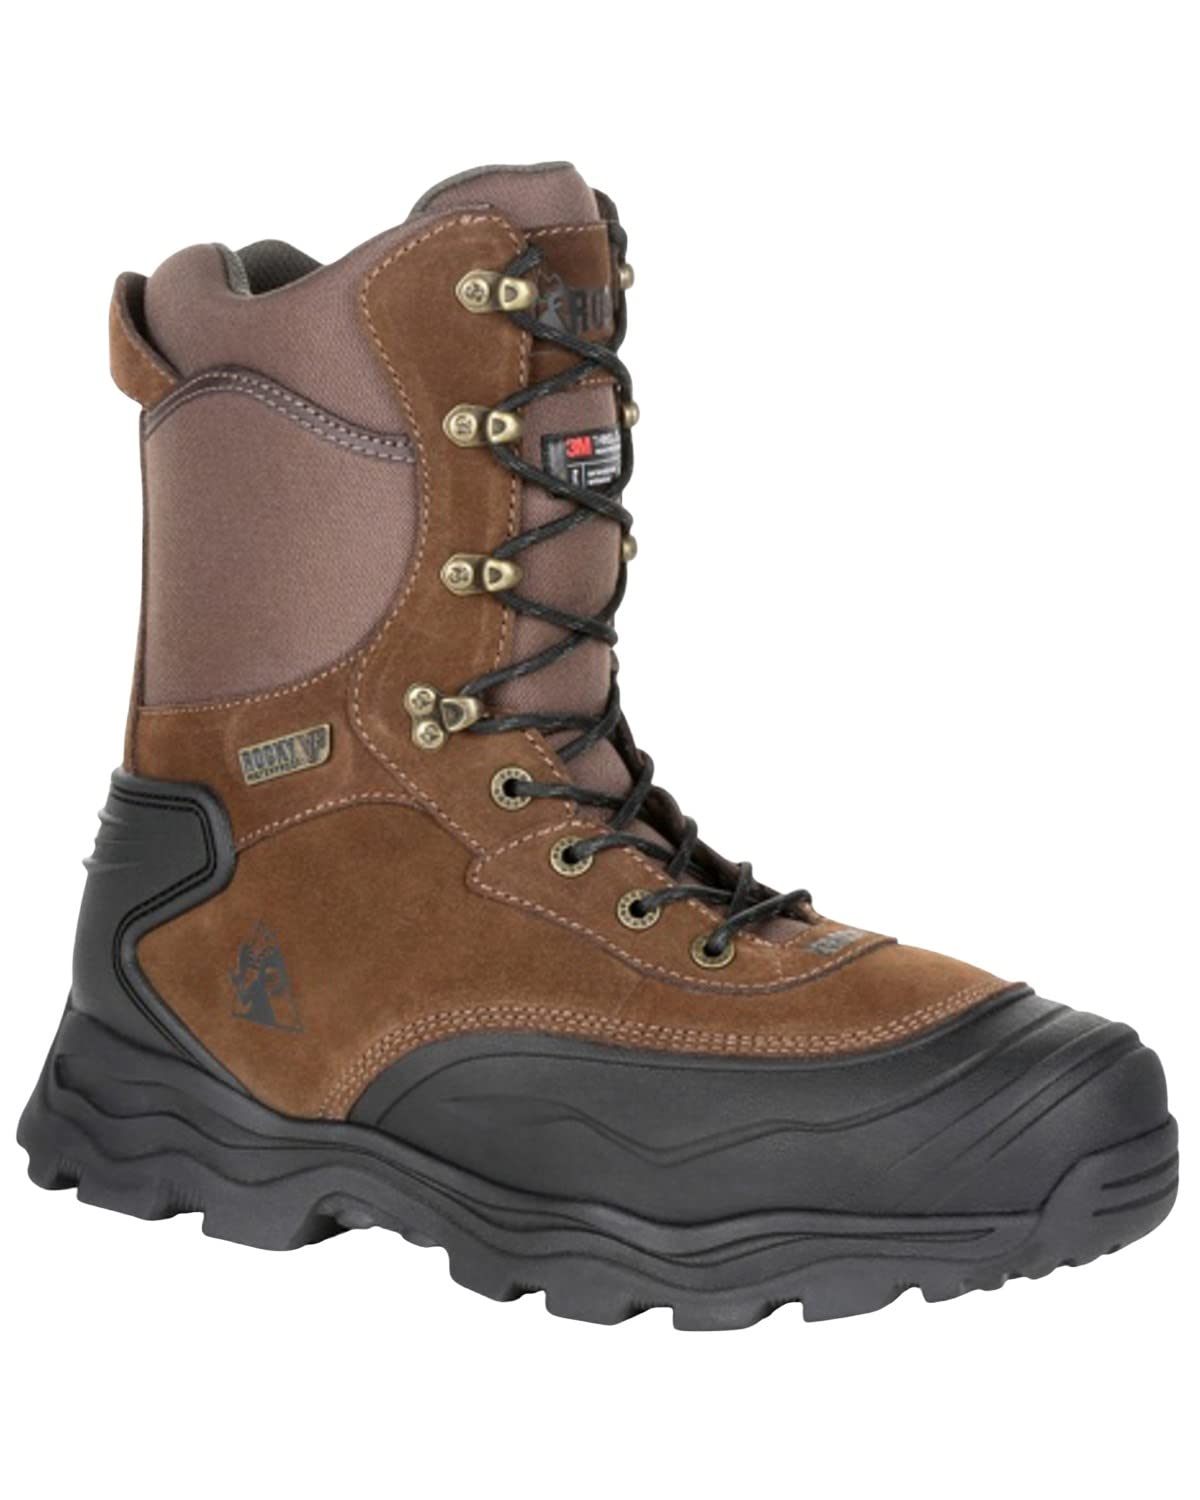 Rocky Men's MULTITRAX Hiking Boot, Brown for $34.24